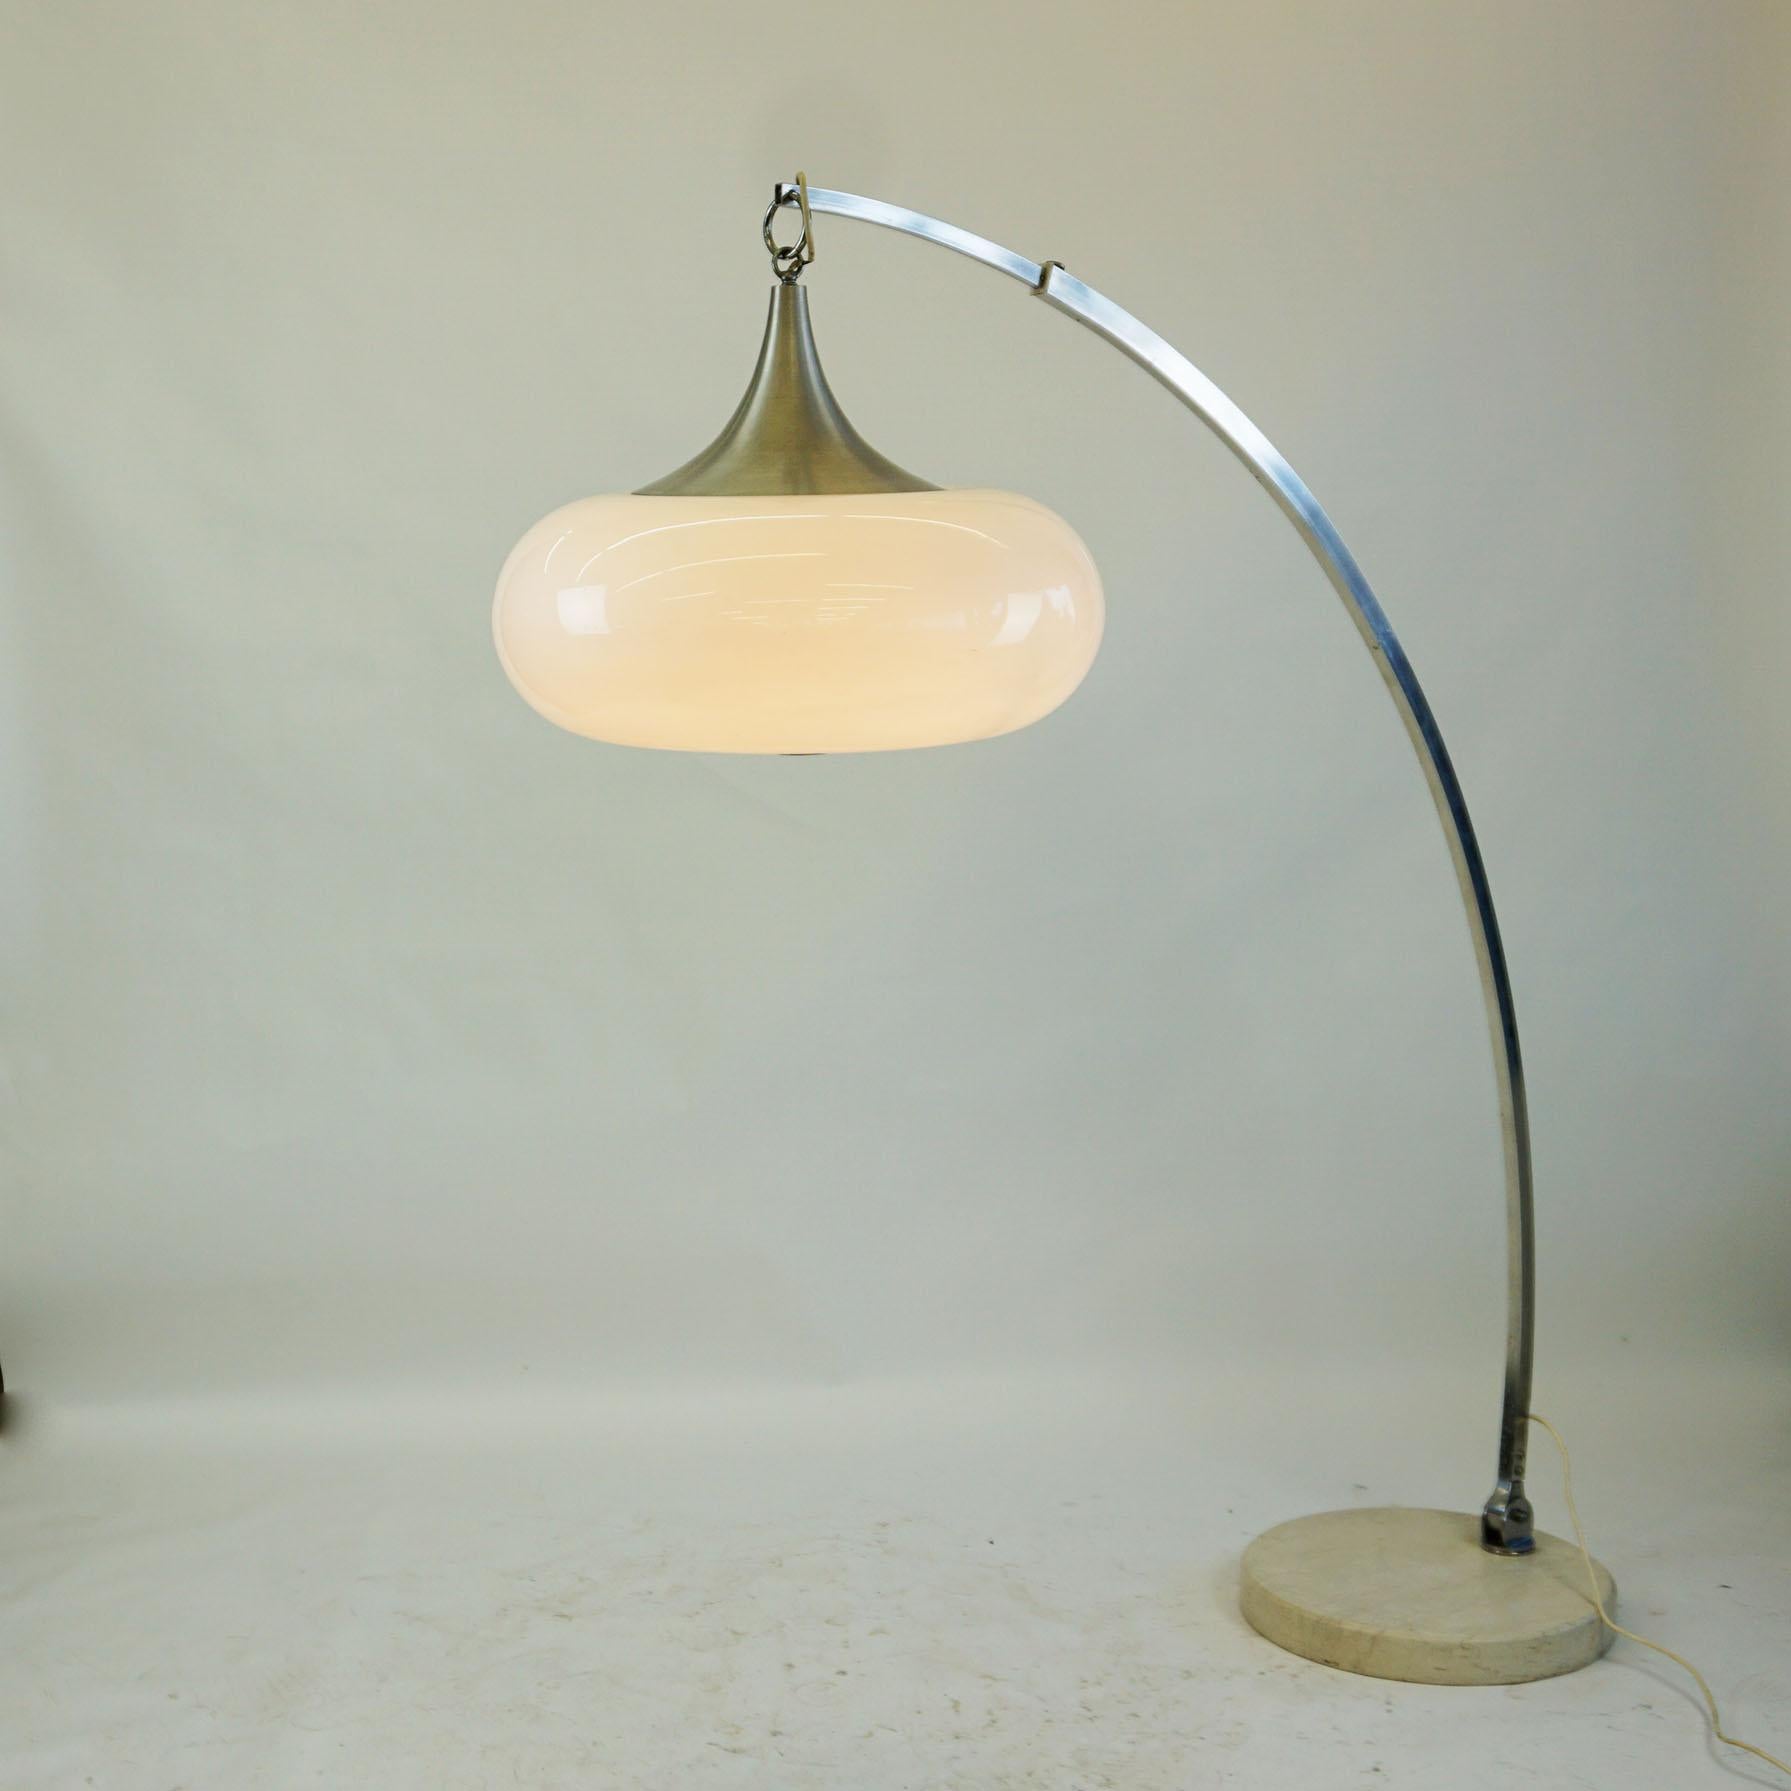 Mid-20th Century Italian Space Age Chrome and Marble Adjustable Arc Floor Lamp with White Shade